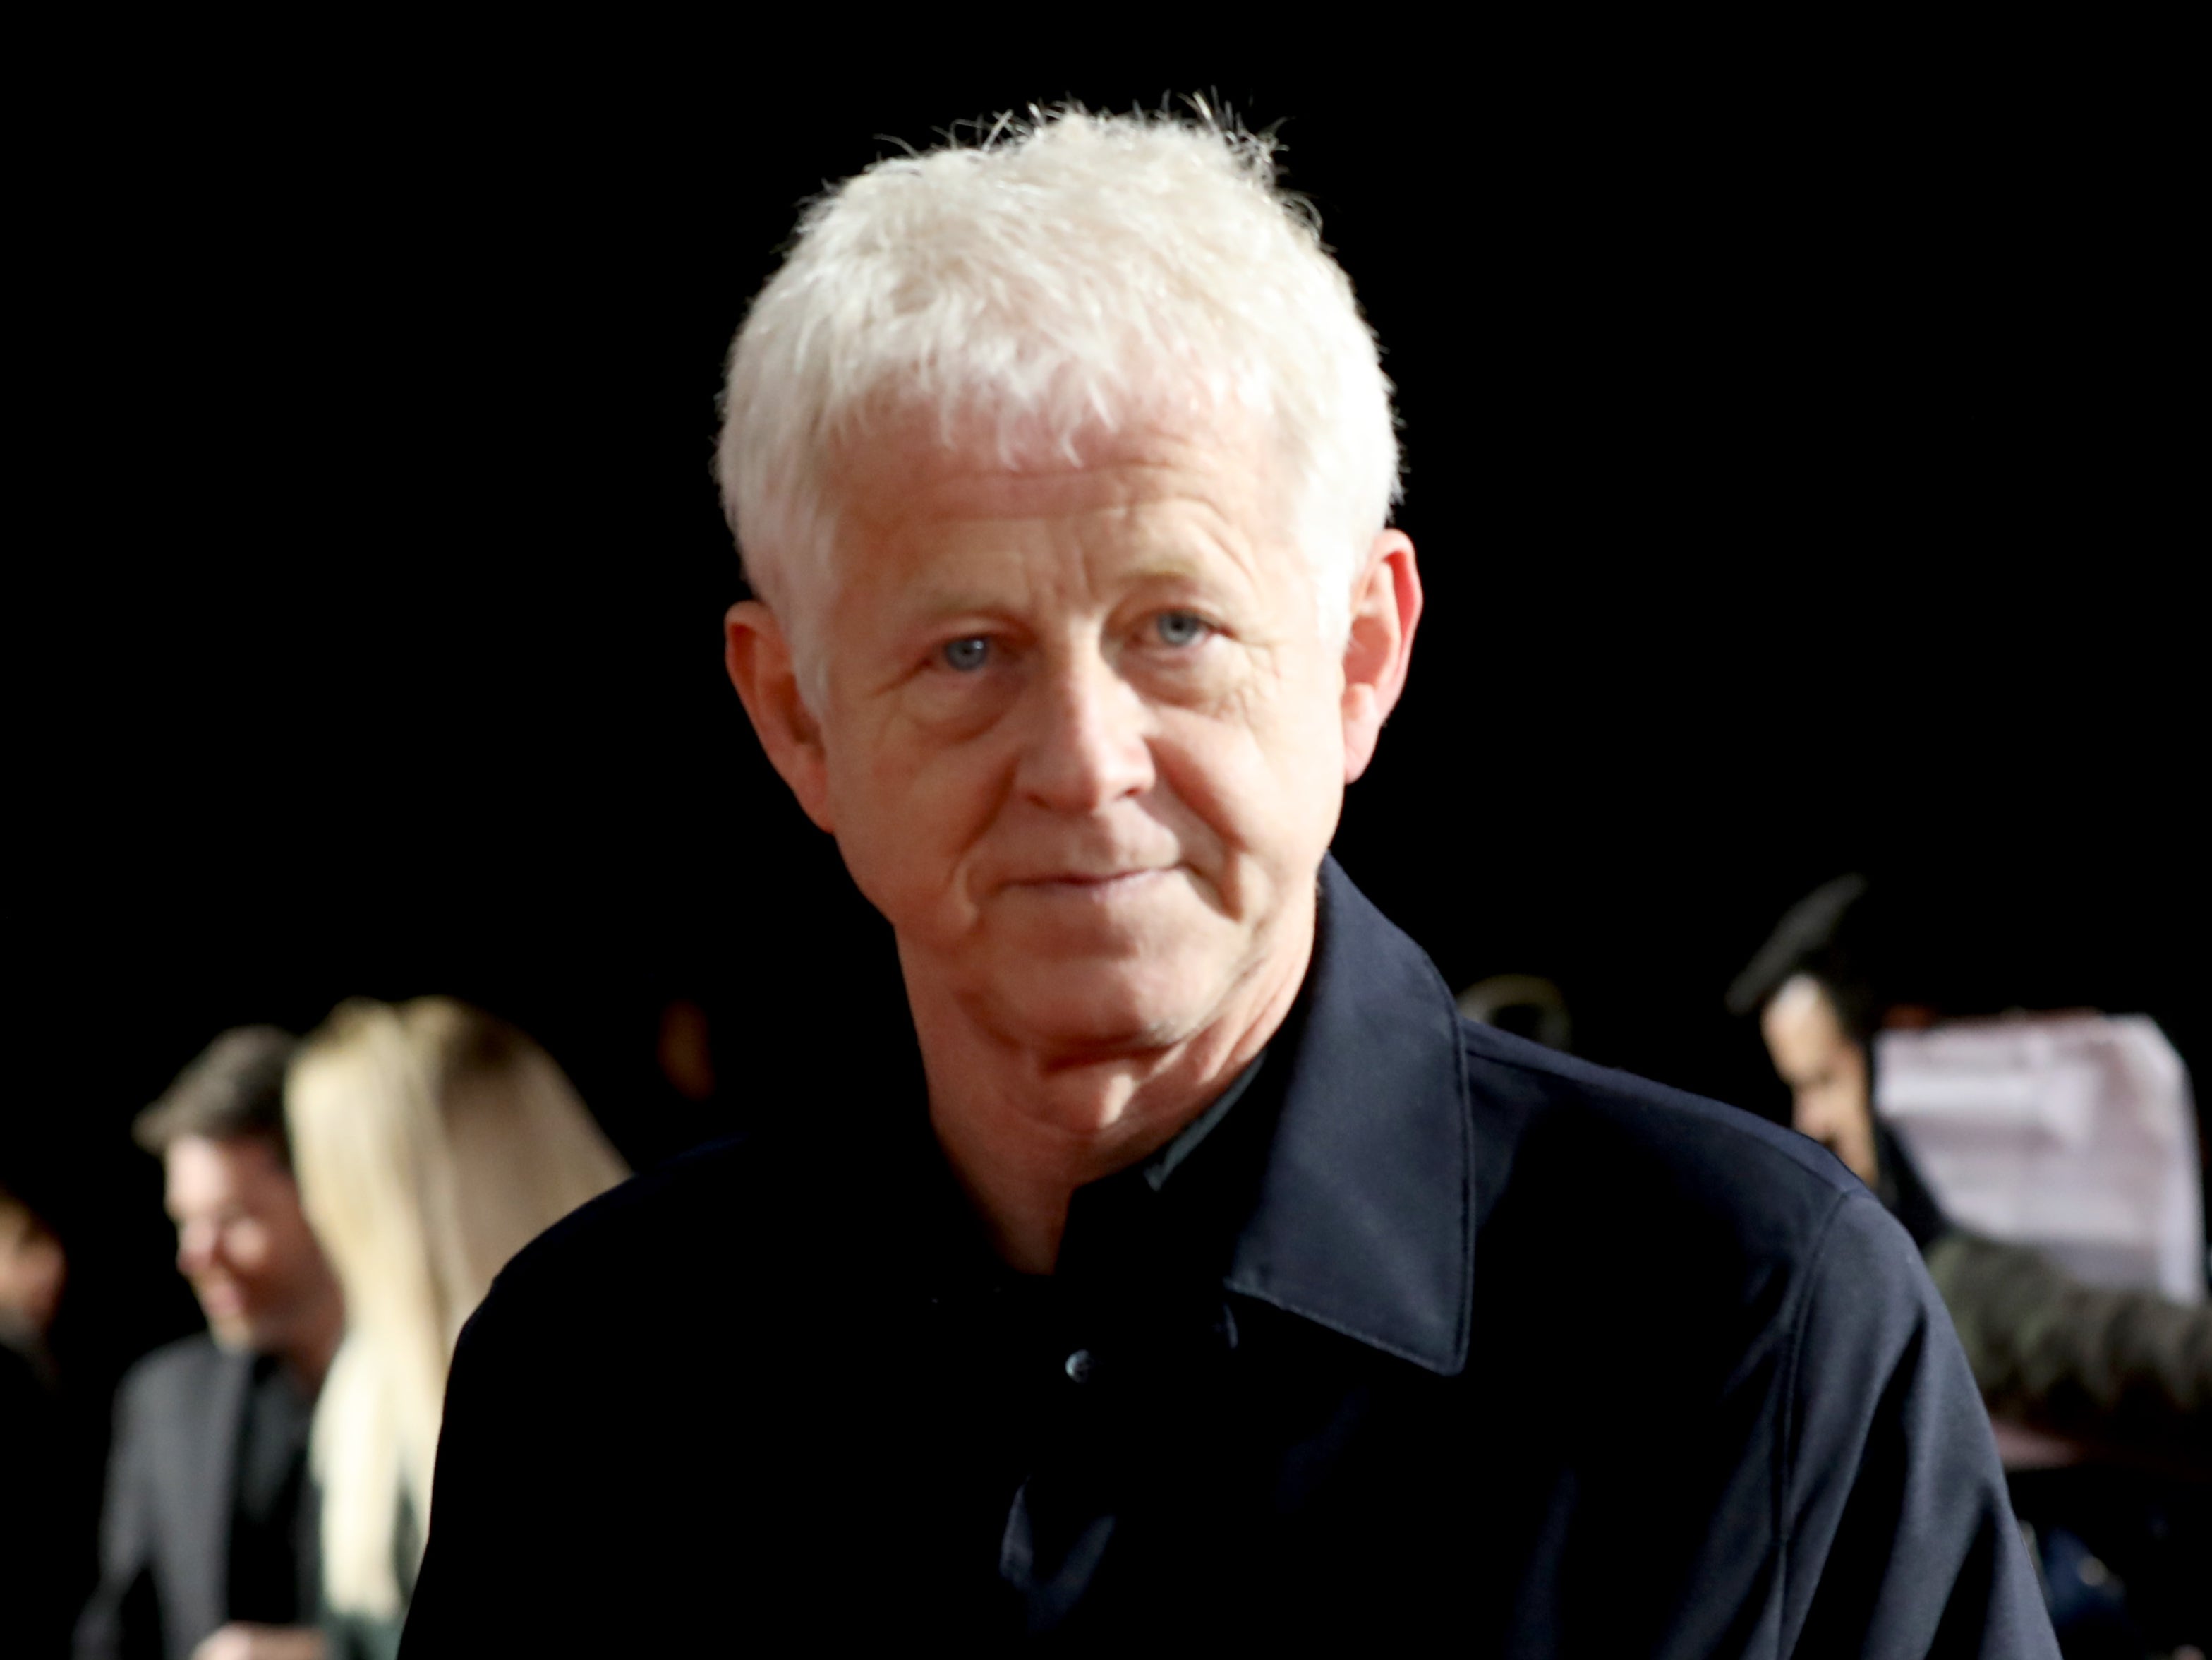 richard curtis made a ‘dreadful mistake’ after omitting song from love actually: ‘i thought it was beautiful’